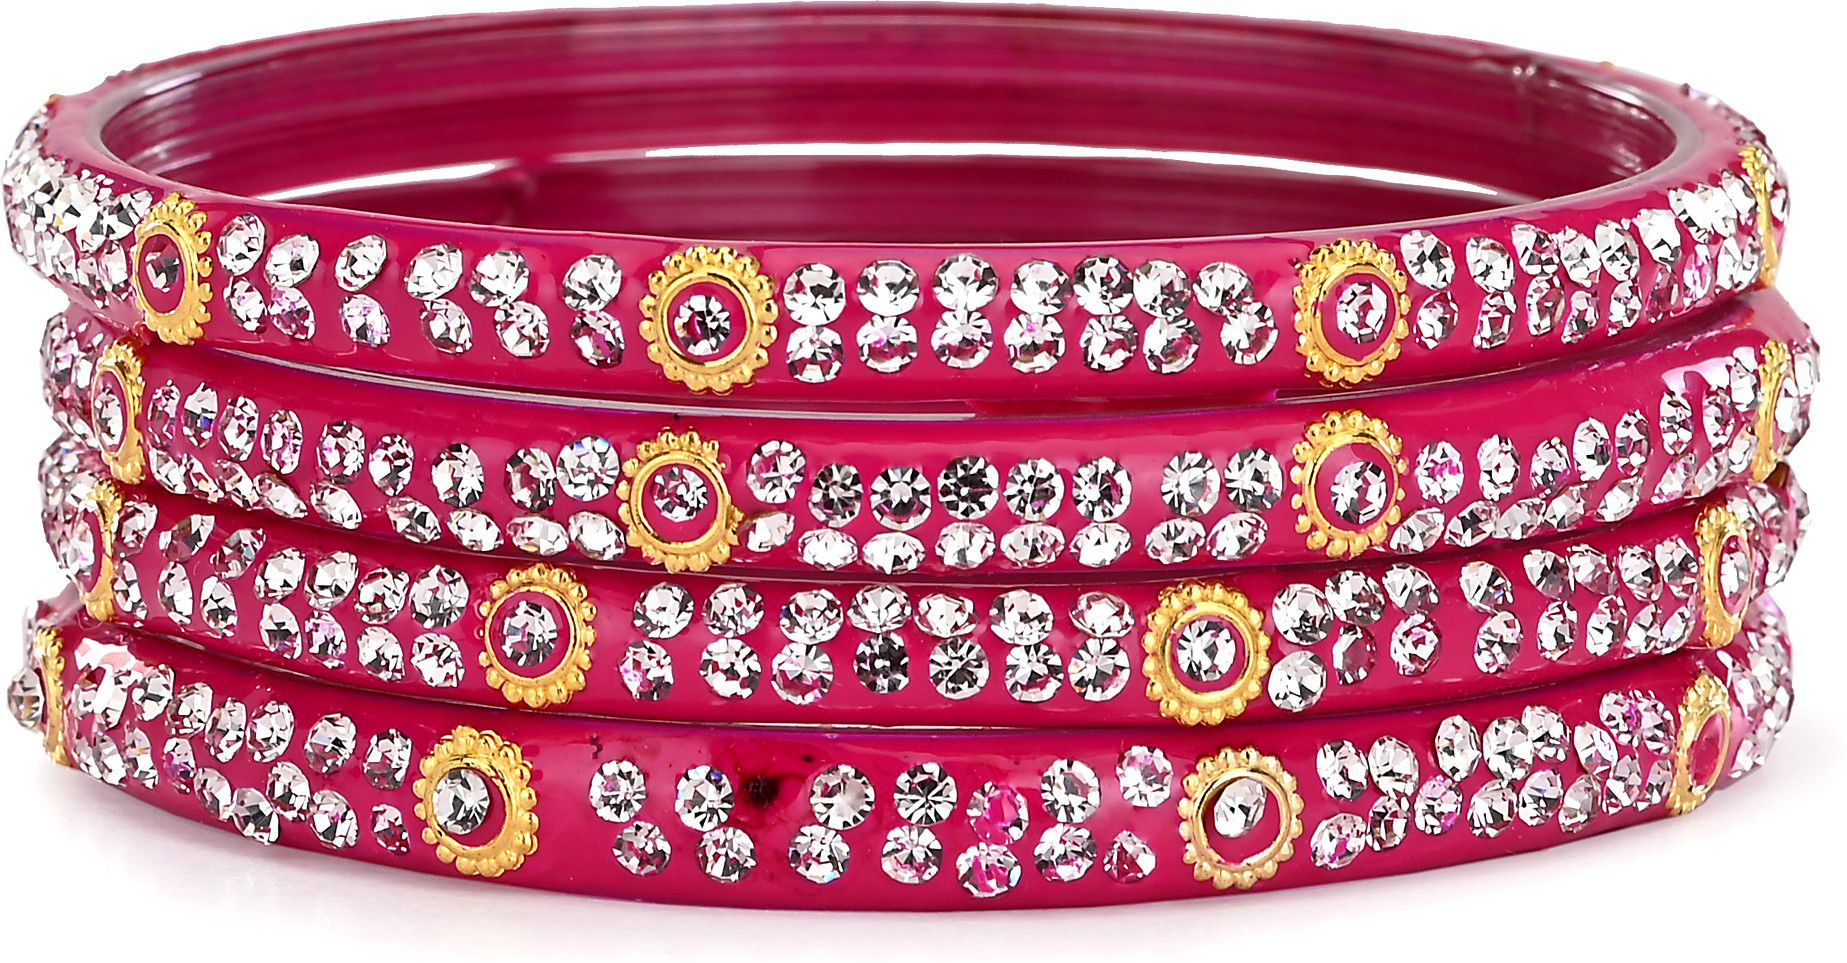     			Somil Designer Bridal Glass Bangle Set For Party Marriage, And Function, Ornamented, Colorful -S10_2.4